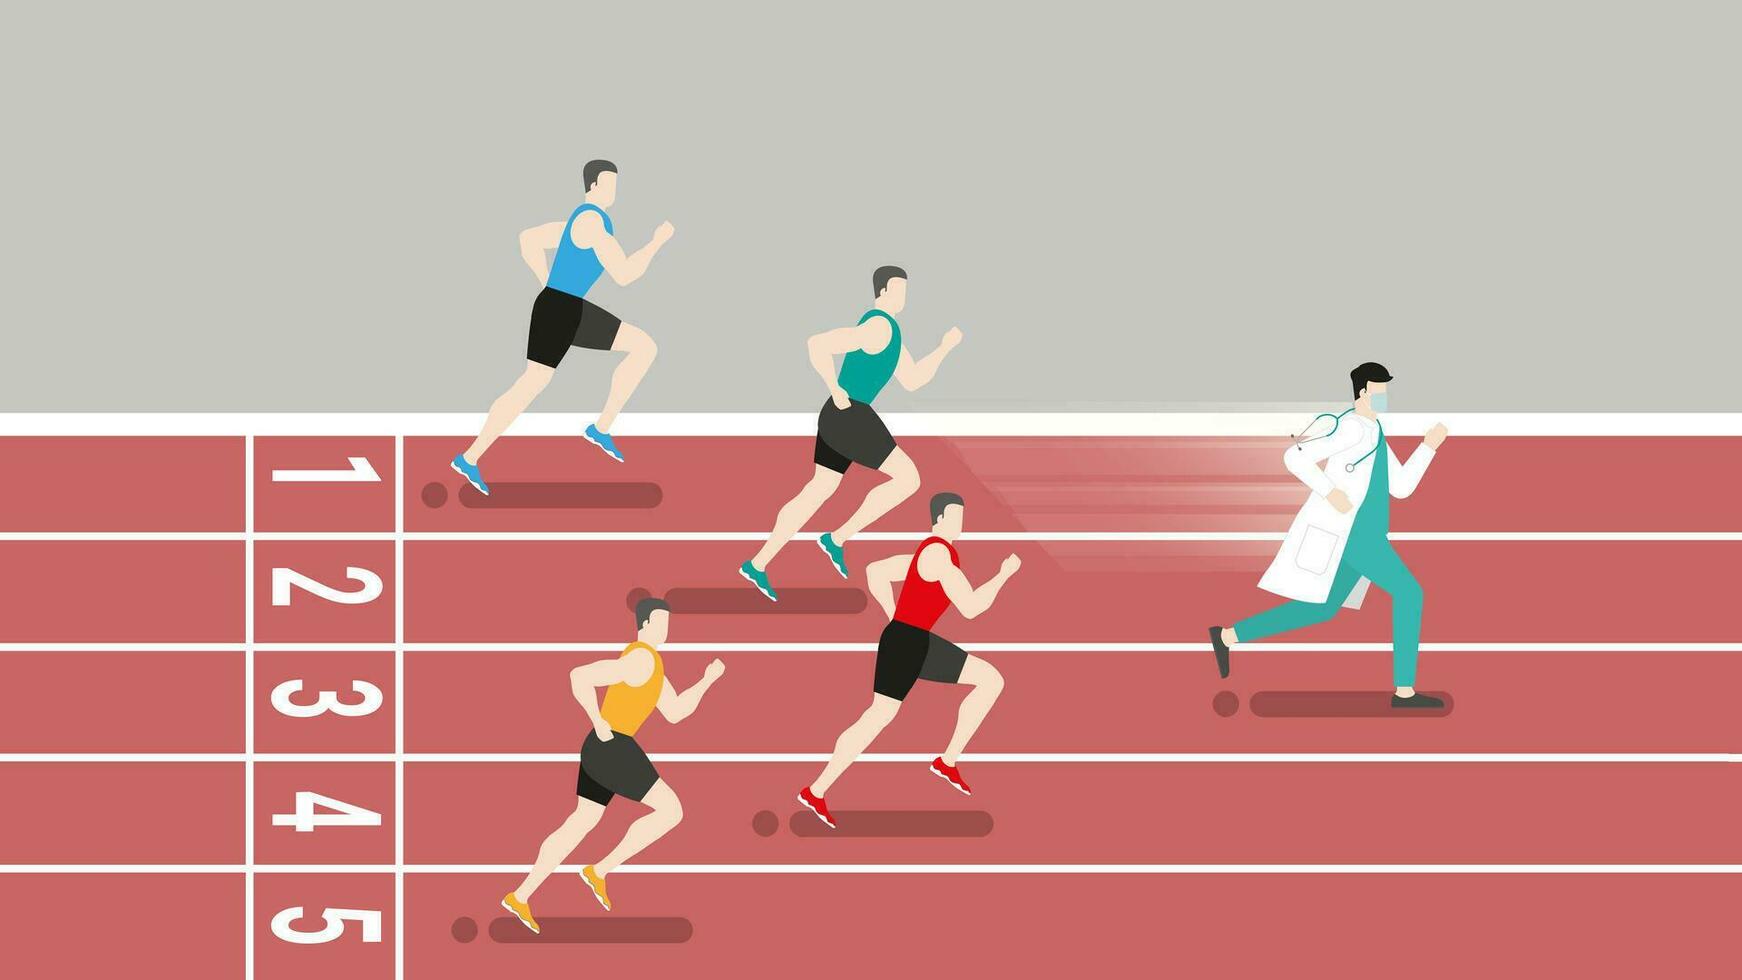 Faster doctor running win over runners athlete in race track vector